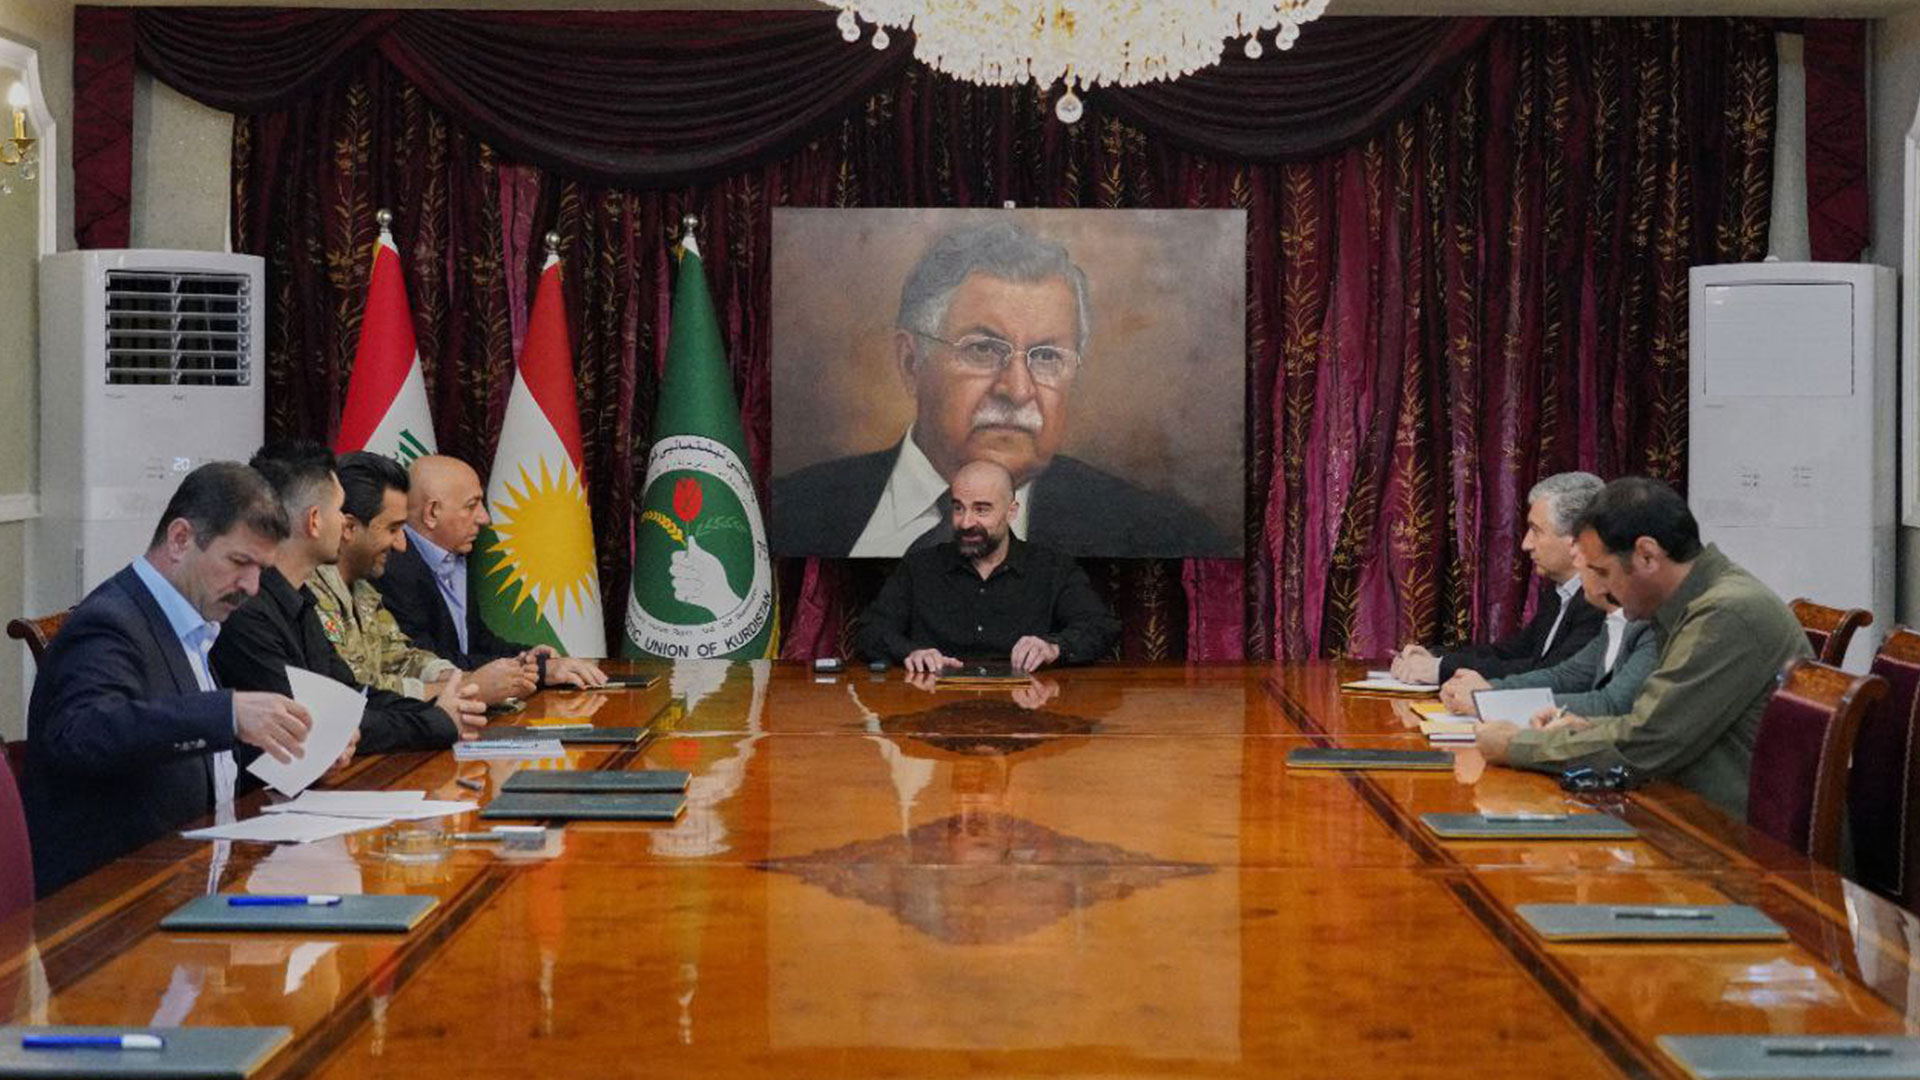 PUK President met with a number of security officials in Sulaymaniyah